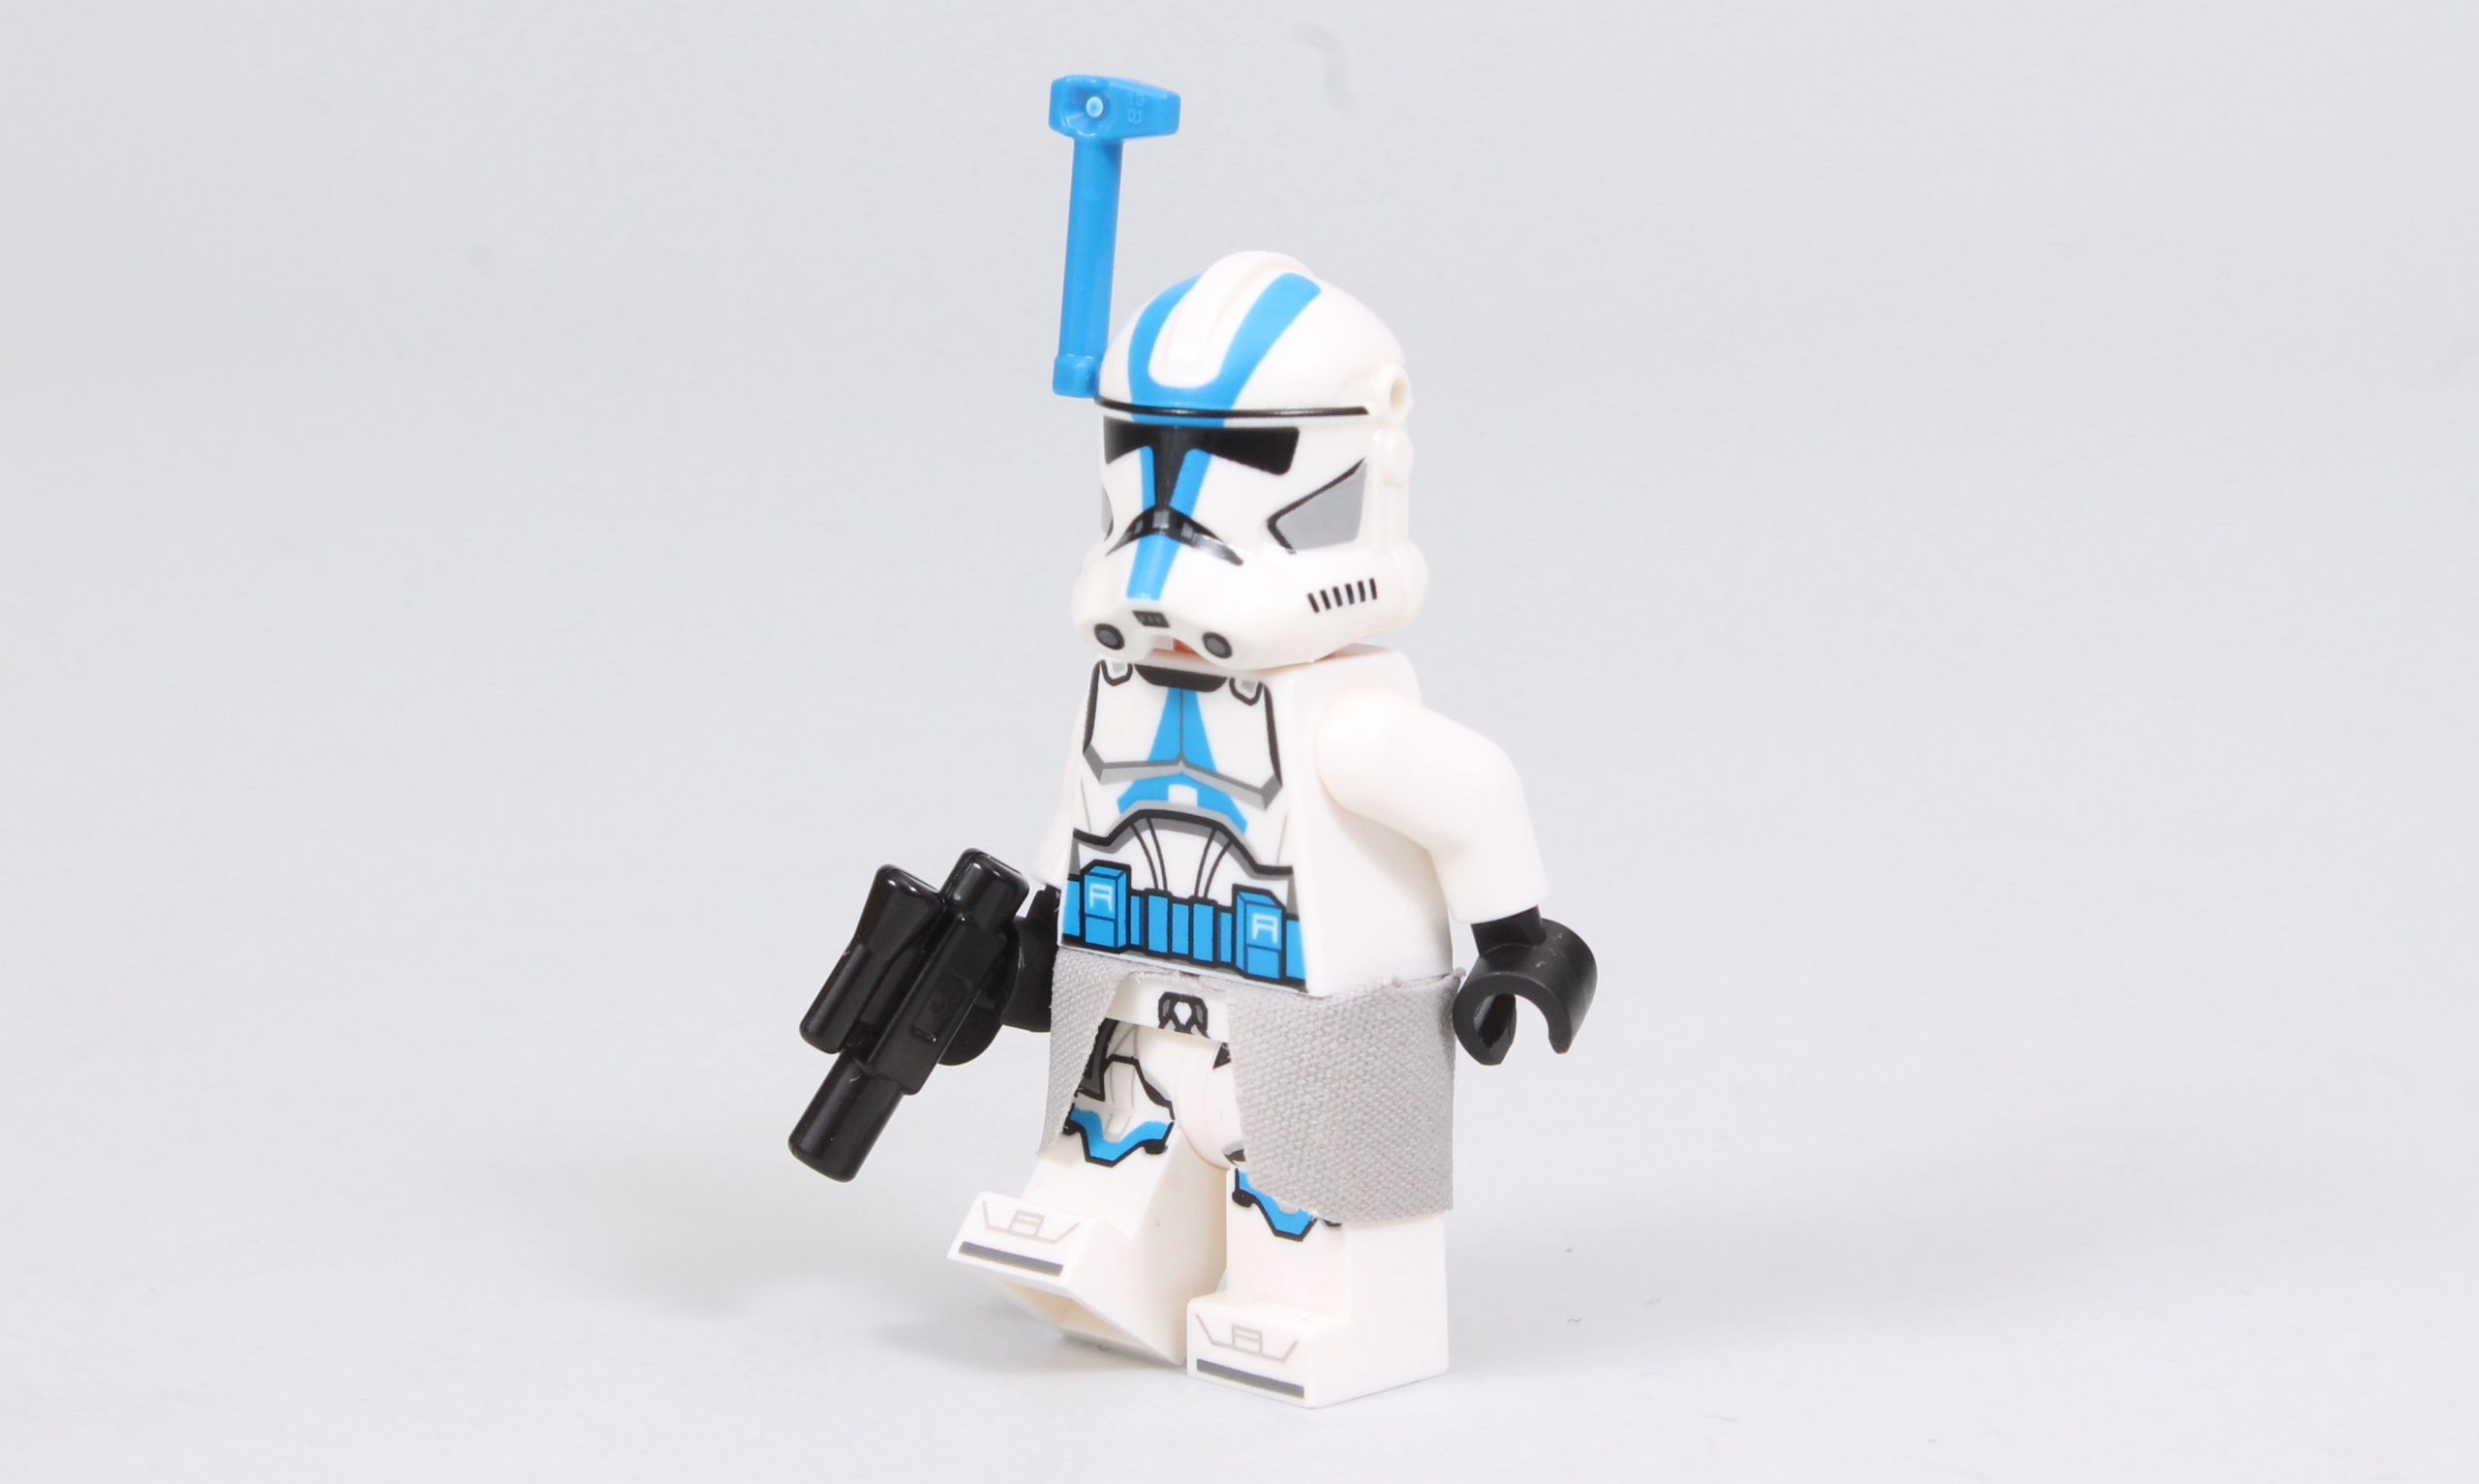 Improving the new LEGO Star Wars 501st Officer minifigure